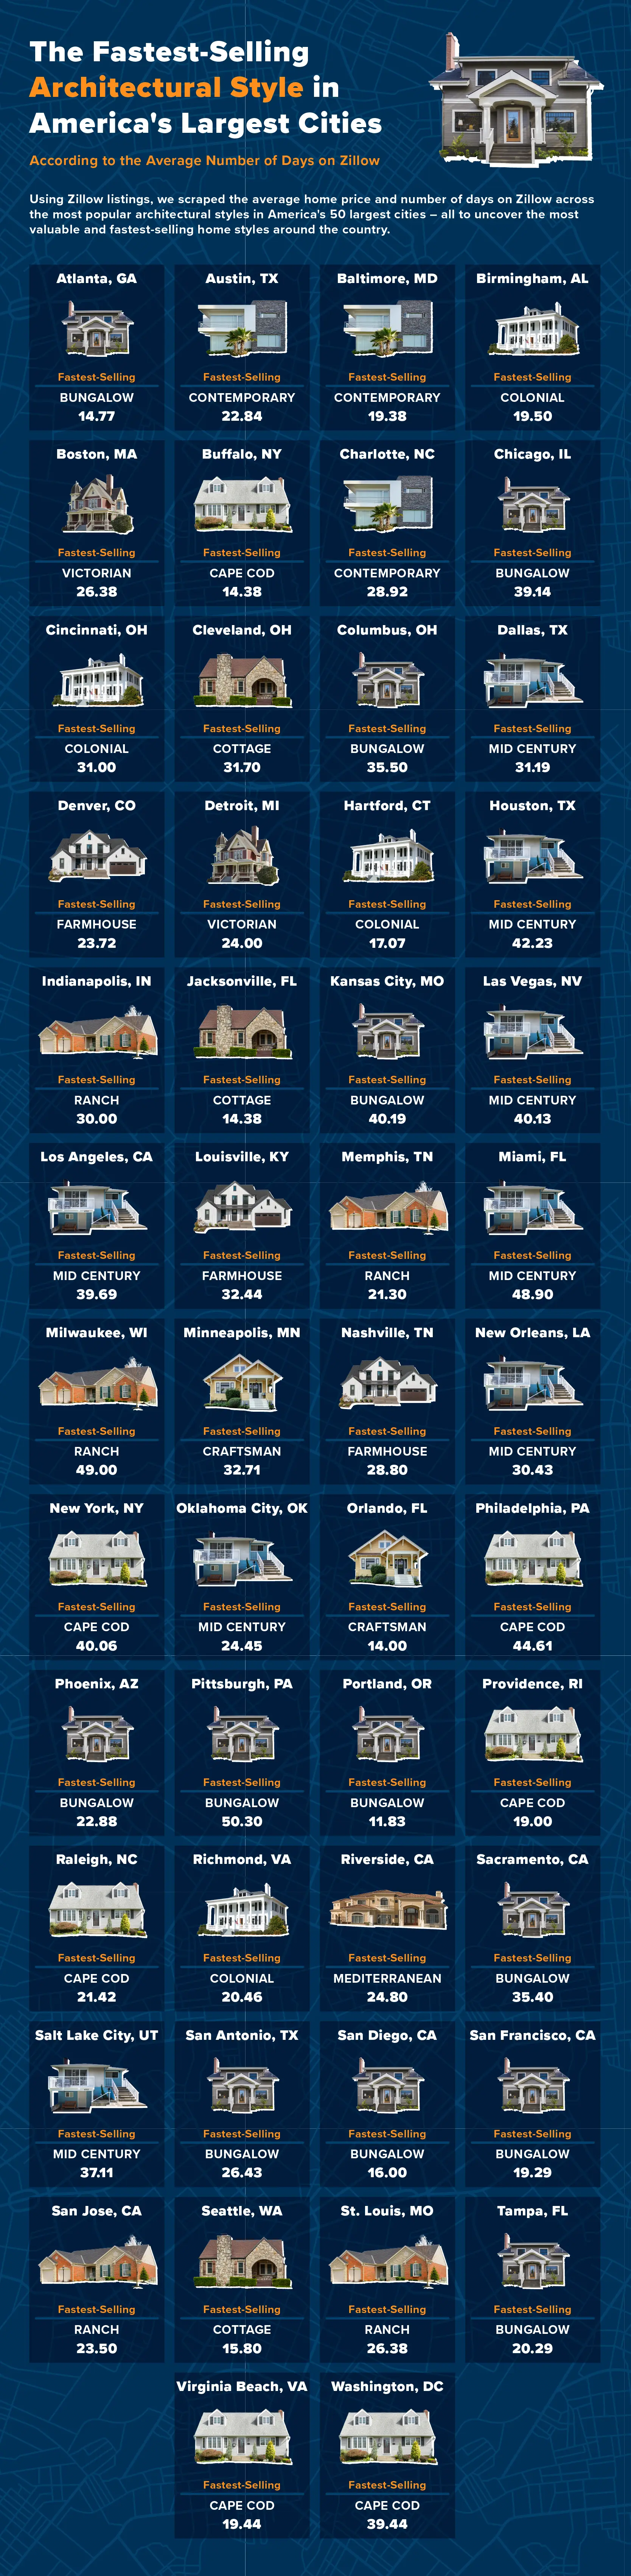 An infographic showing the fastest-selling home style in 50 U.S. cities